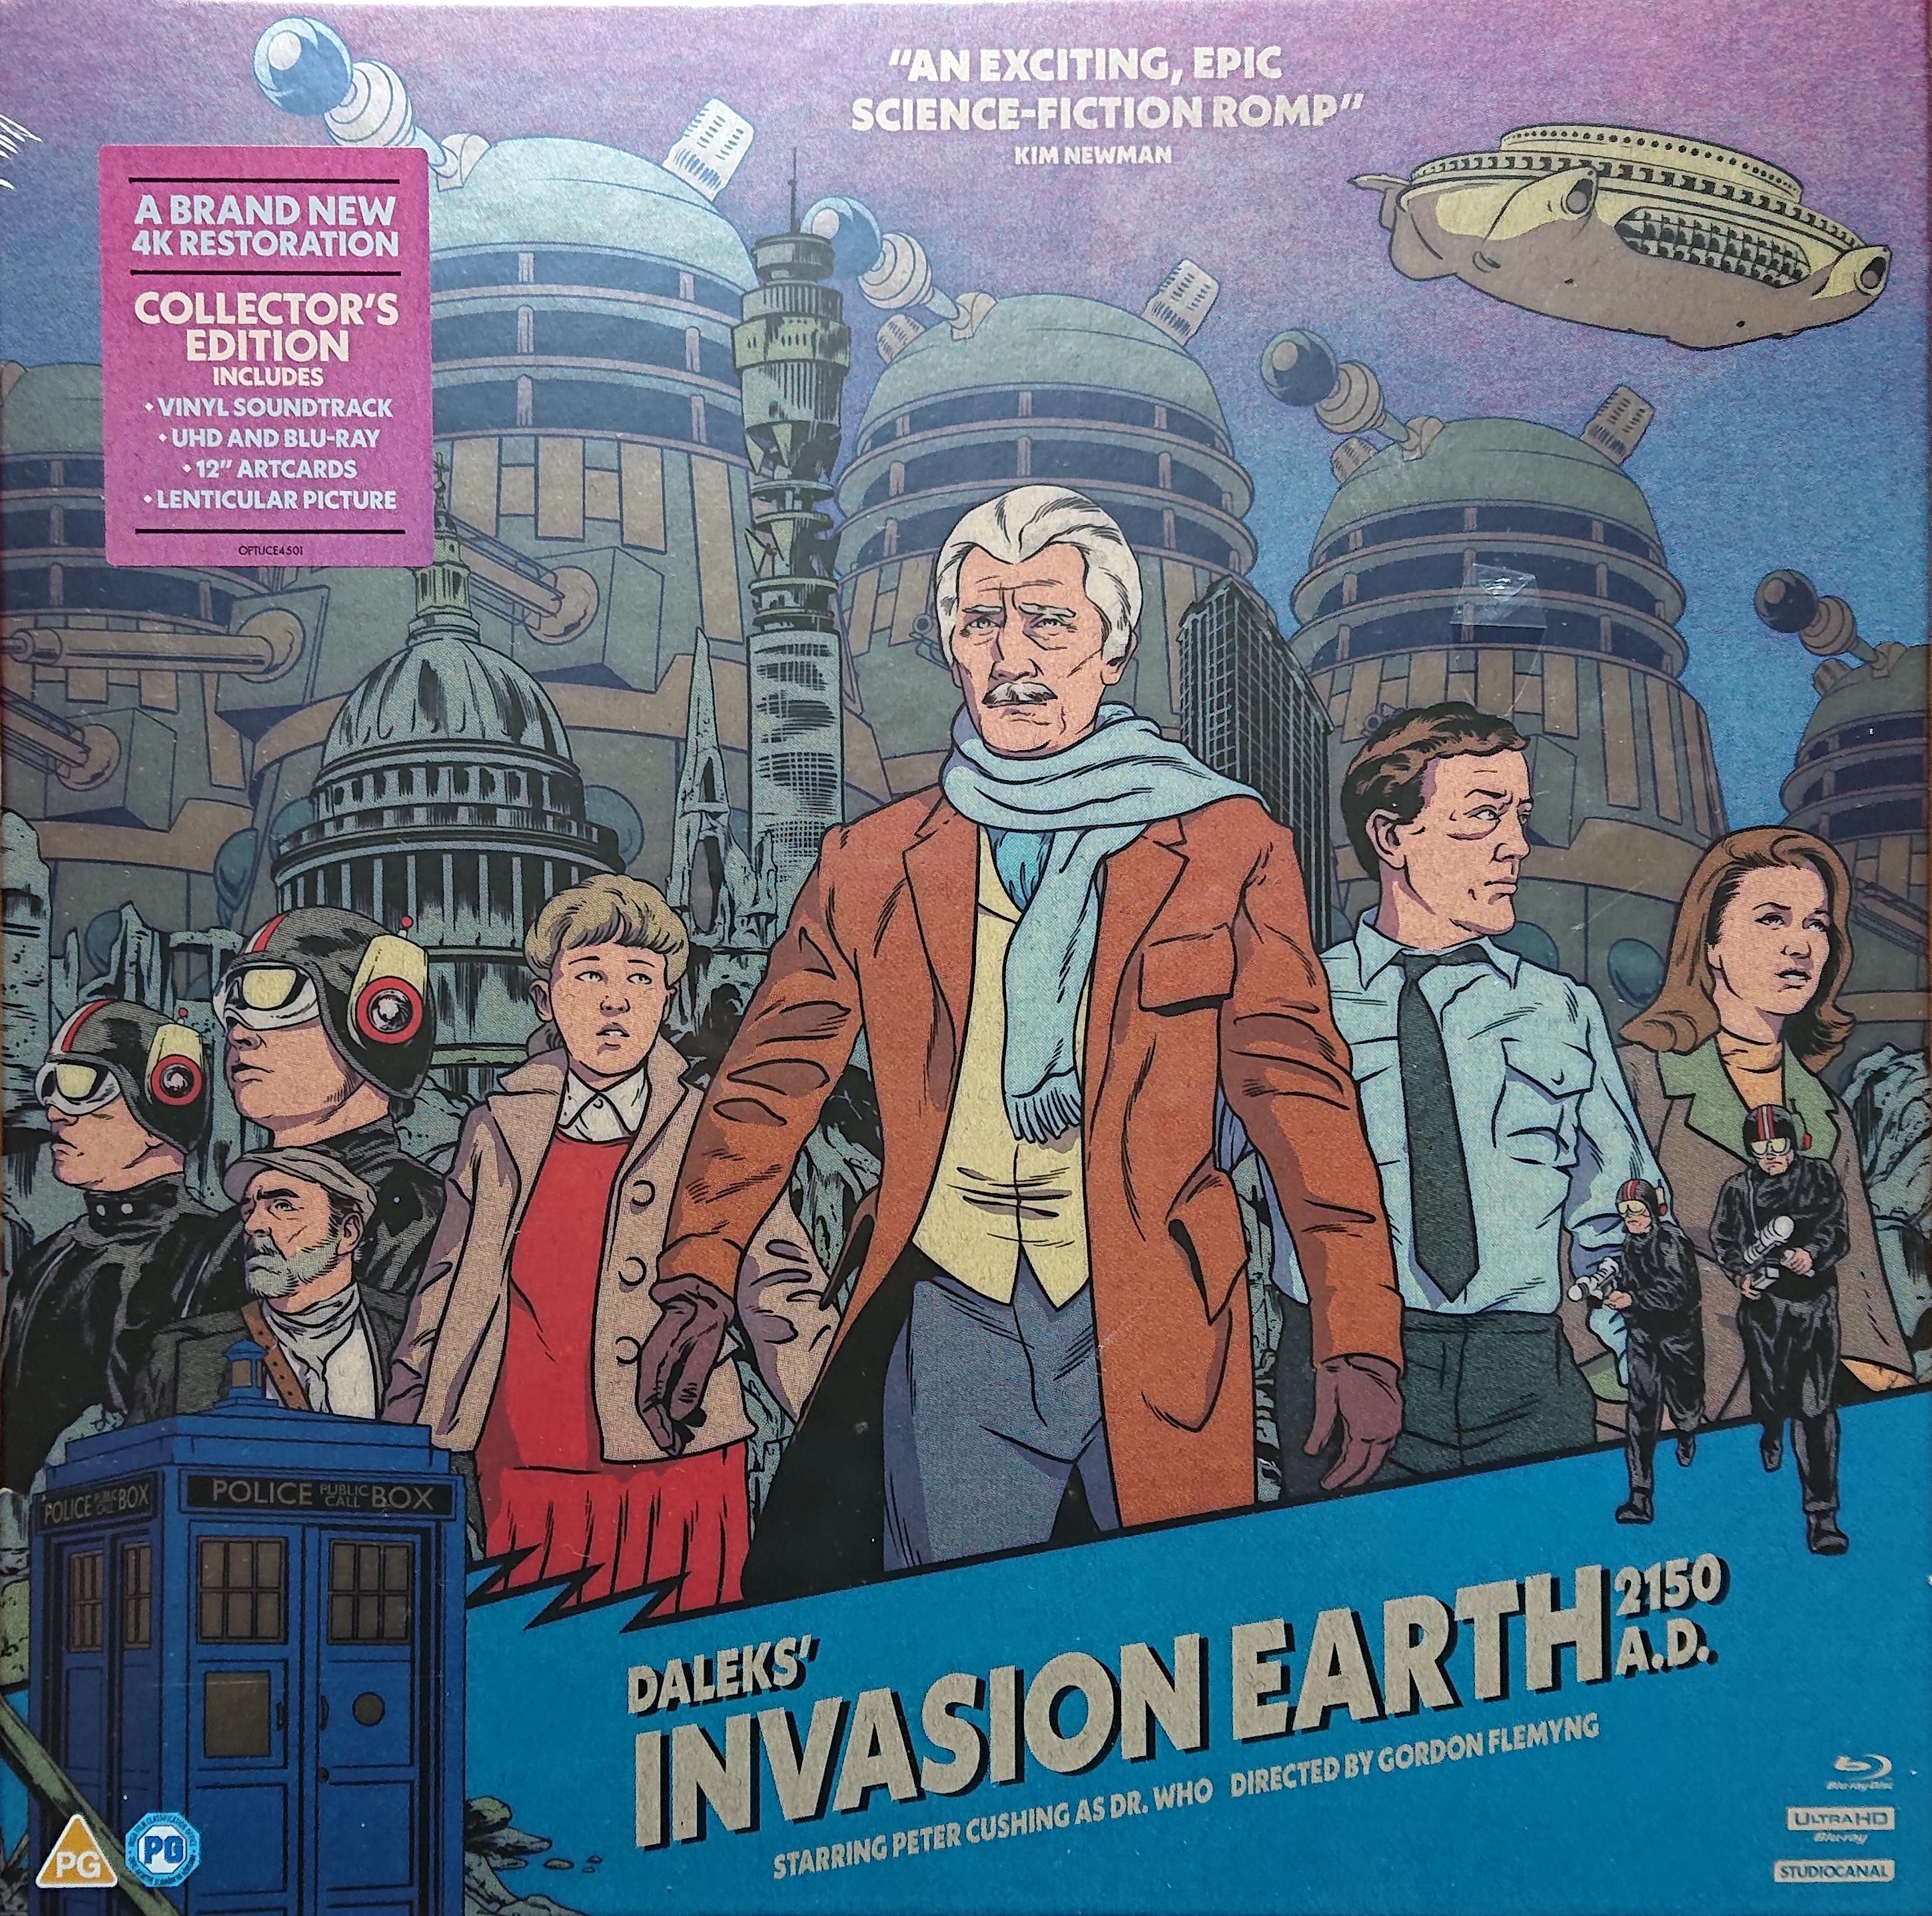 Picture of OPTUCE 4501 Dr. Who Daleks' invasion Earth 2150AD by artist Terry Nation / Milton Subotsky from the BBC records and Tapes library